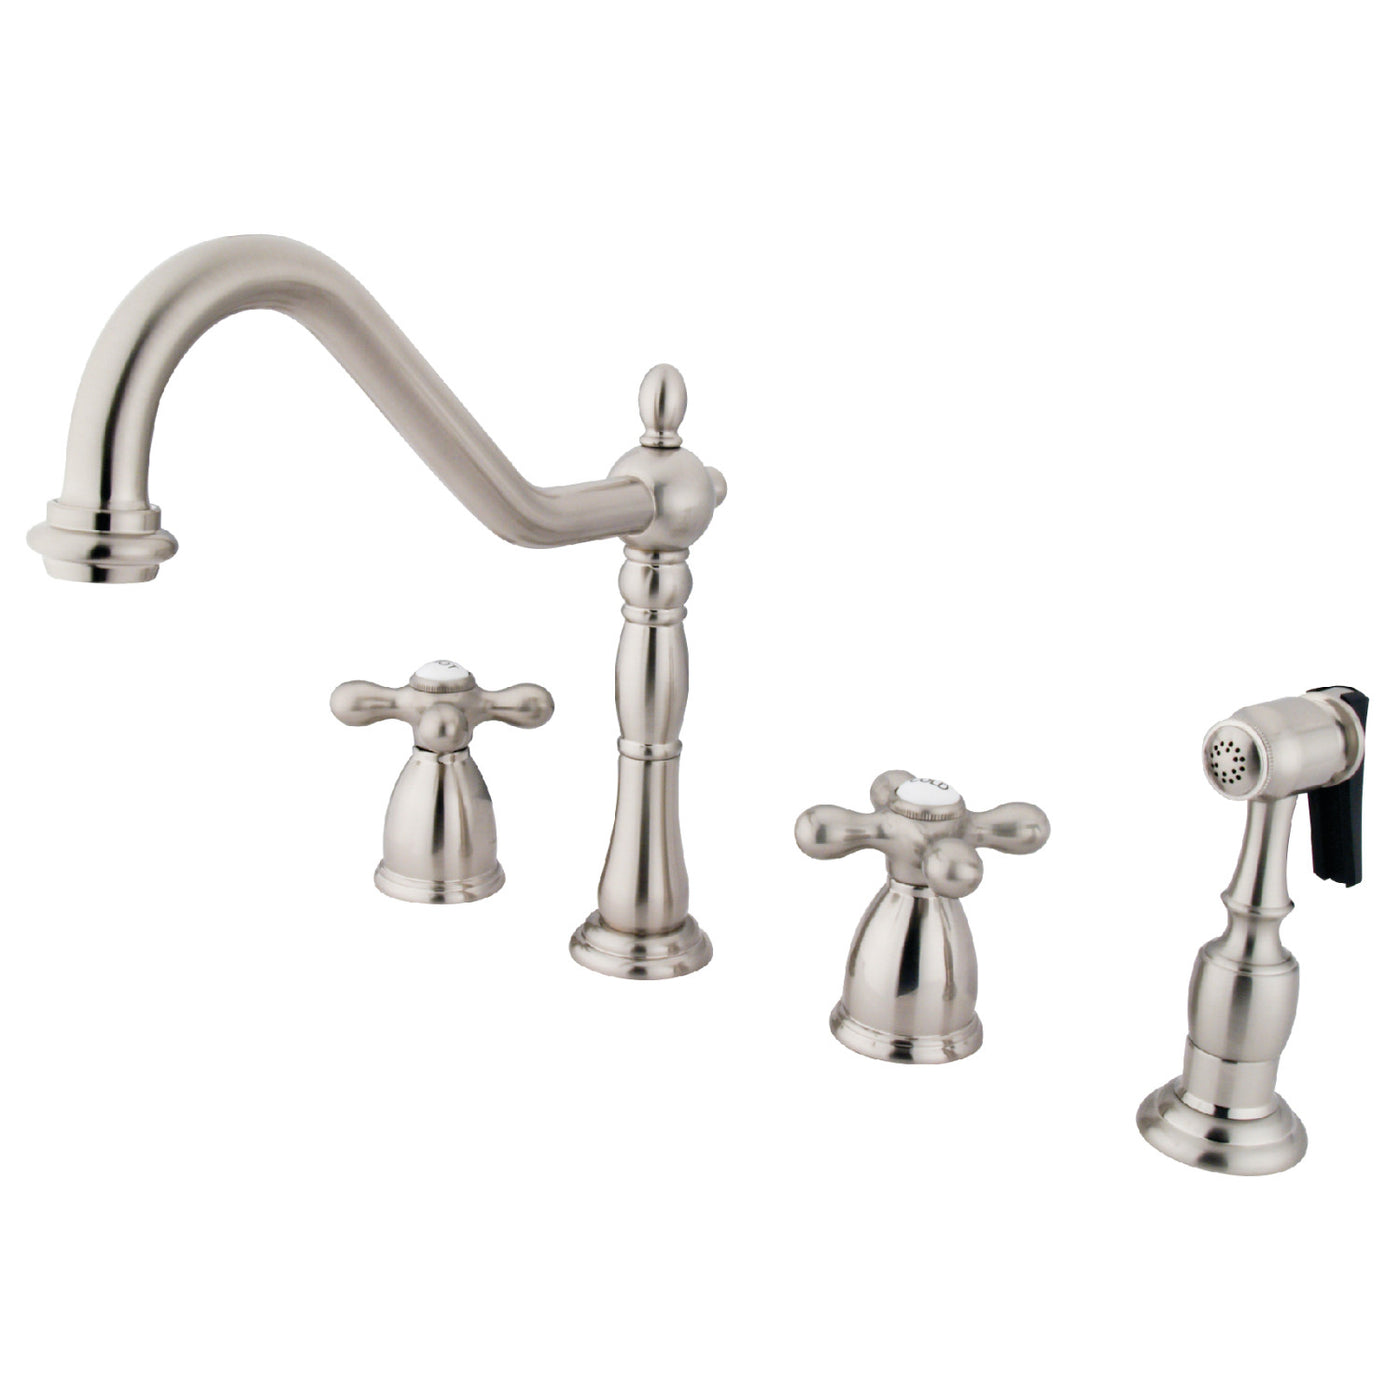 Elements of Design EB1798AXBS Widespread Kitchen Faucet with Brass Sprayer, Brushed Nickel